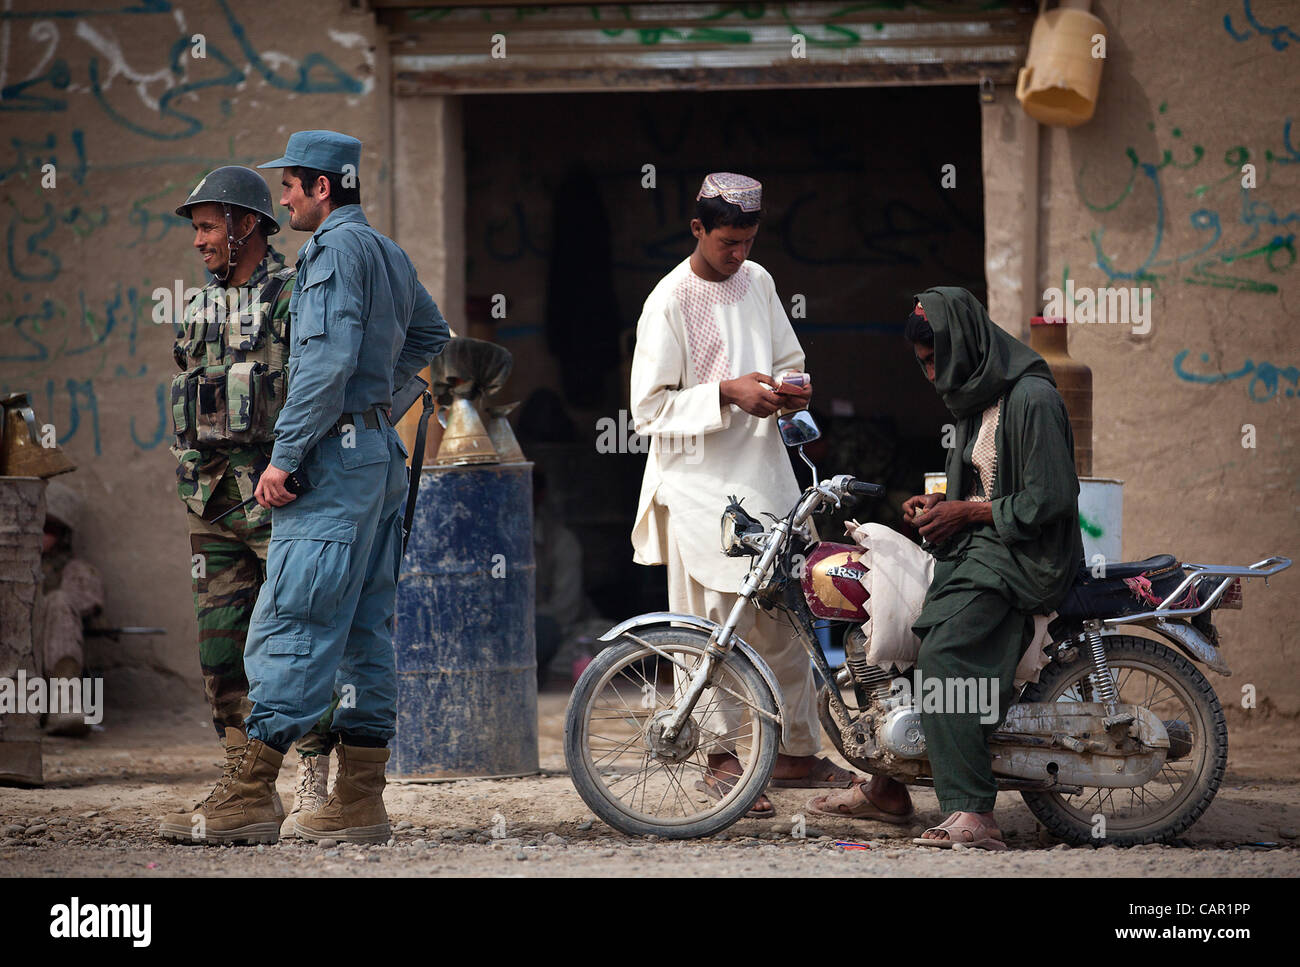 Afghan National Police Lt. Naib (second from left) interacts with an Afghan National Army soldier outside a fuel store in the Hazar Joft Bazaar while manning a vehicle checkpoint here, April 10, 2012. Stock Photo